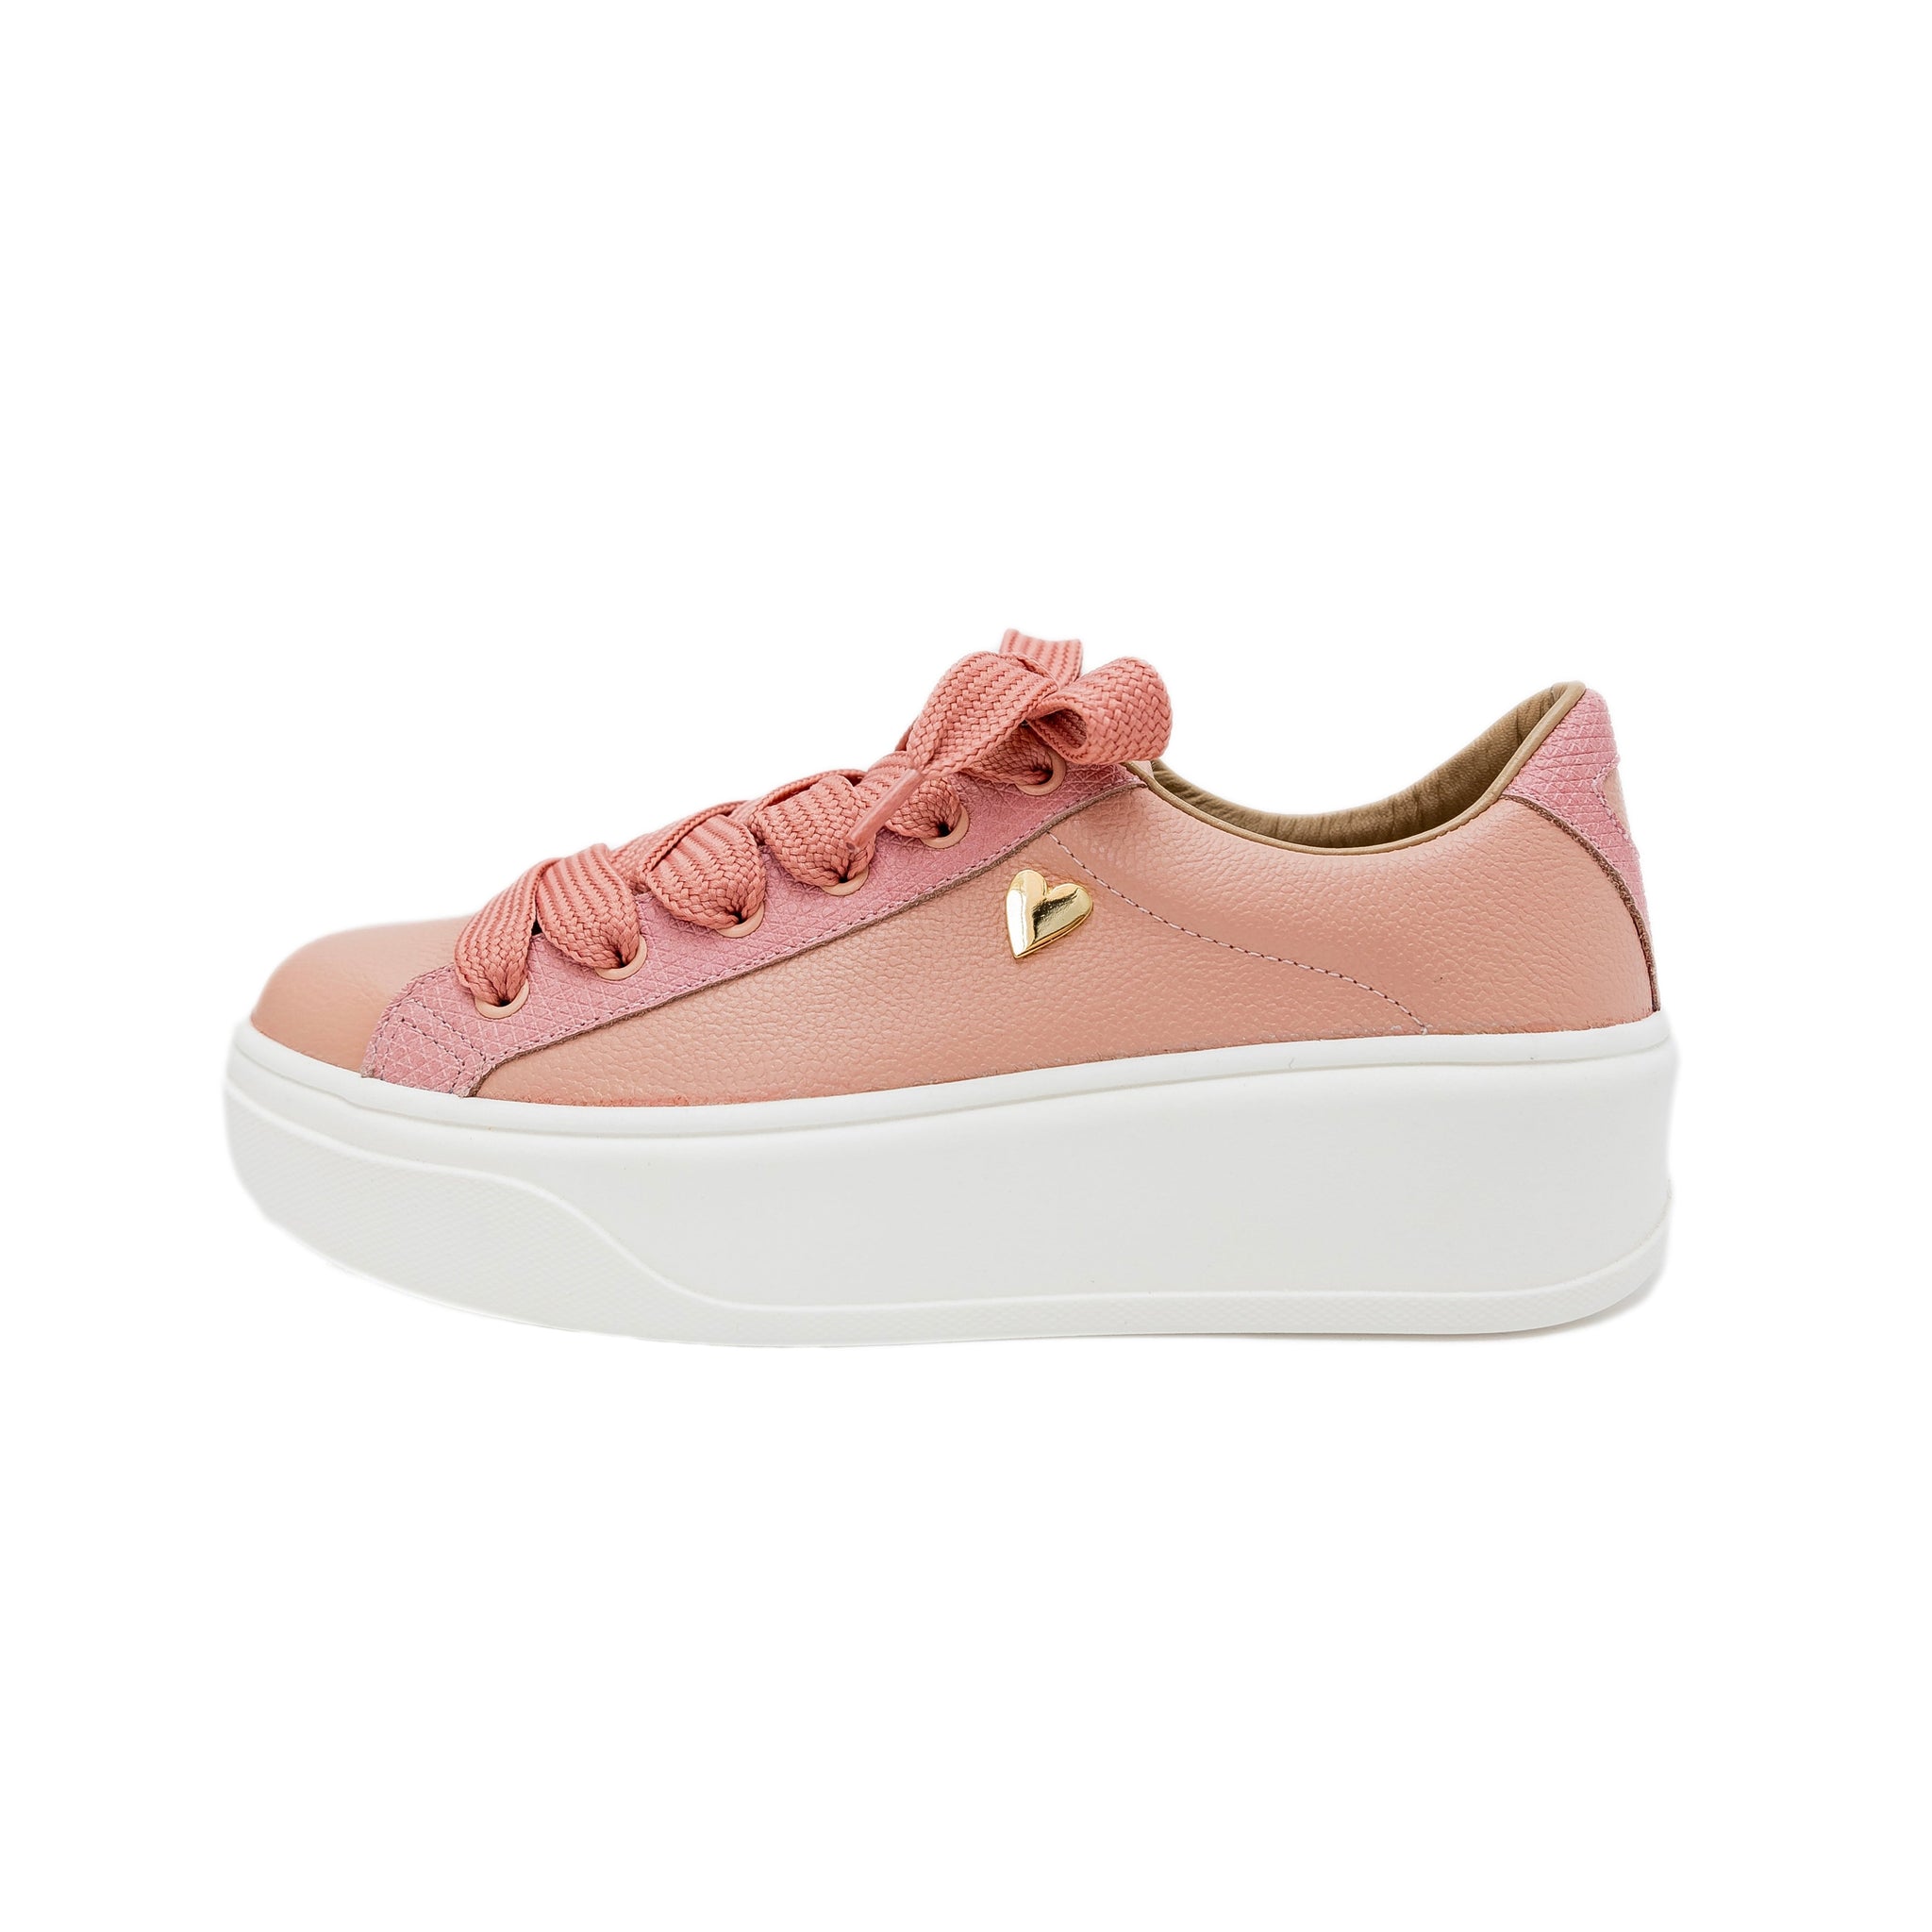 Briana Pink Sneakers by Nataly Mendez Genuine leather upper material Genuine leather insole lining Rubber platform lining American sizes Flexible rubber outsole Hand made 1.5 inch heel height 1 inch platform